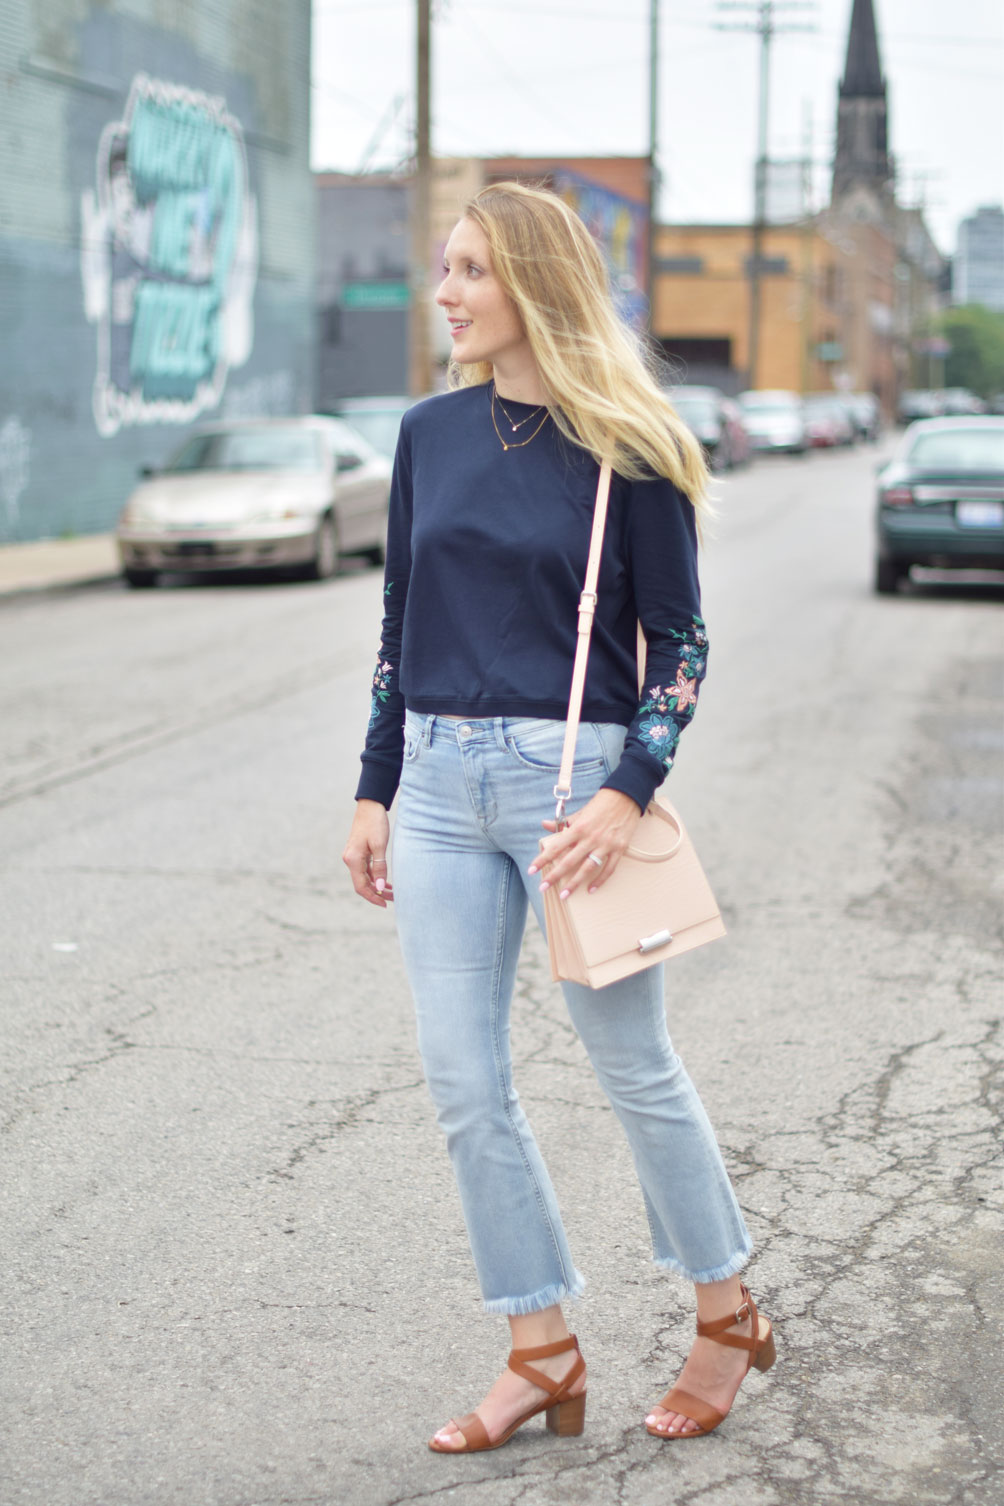 Leslie Musser wears kick flare denim with an embroidered sweatshirt and structured blush purse on one brass fox